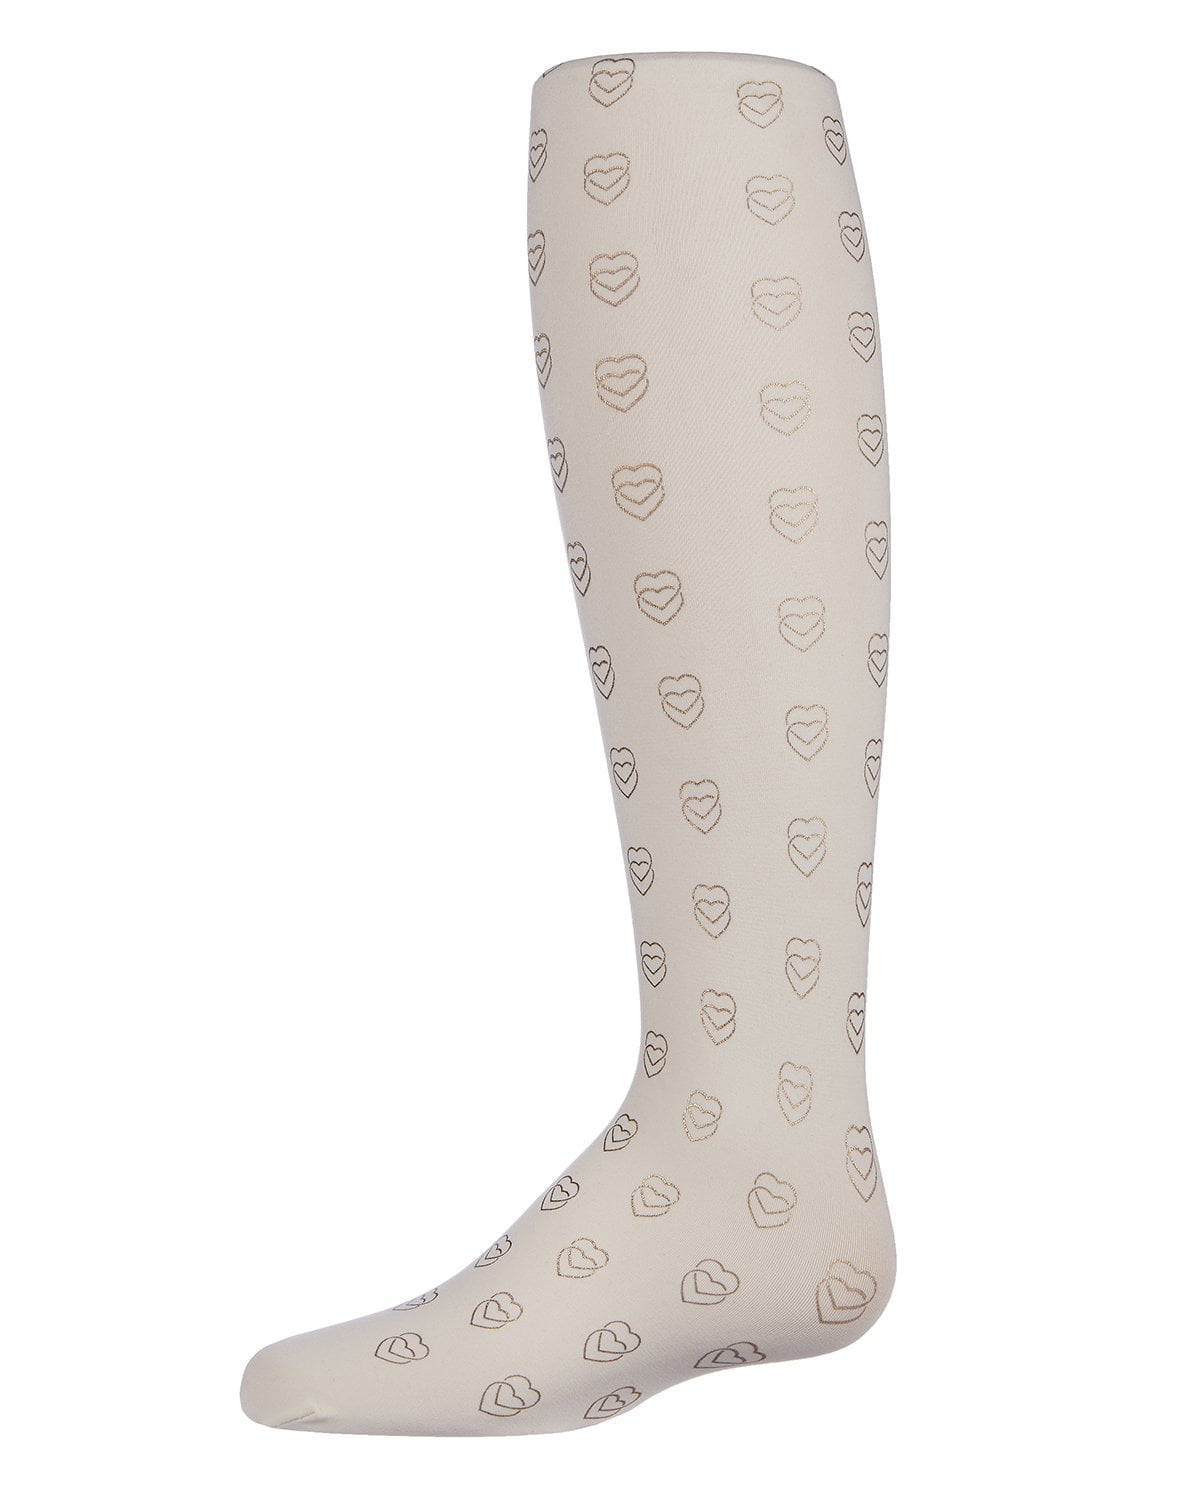 Tropical Fruits Compression Socks For Women 3D Print Knee High Boot 